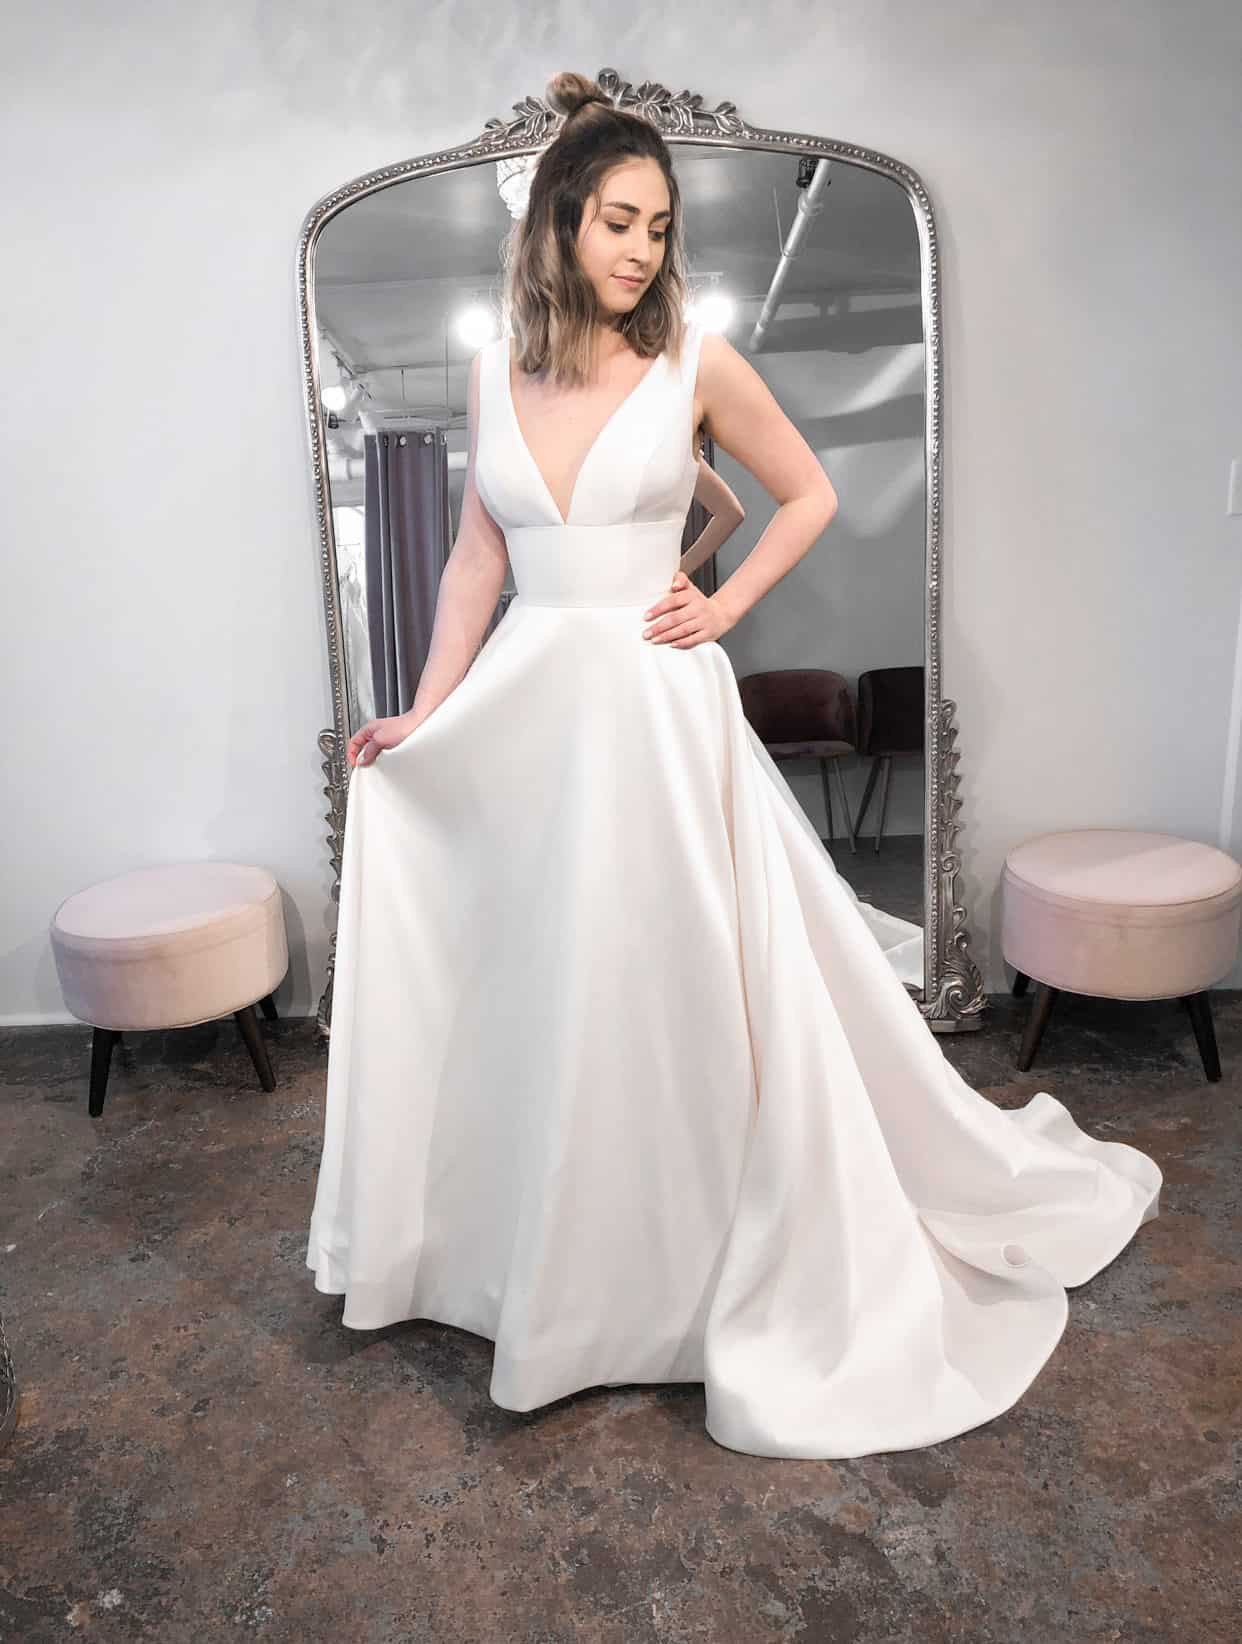 Bridal Looks 2020
 Wedding Dress Trends for 2020